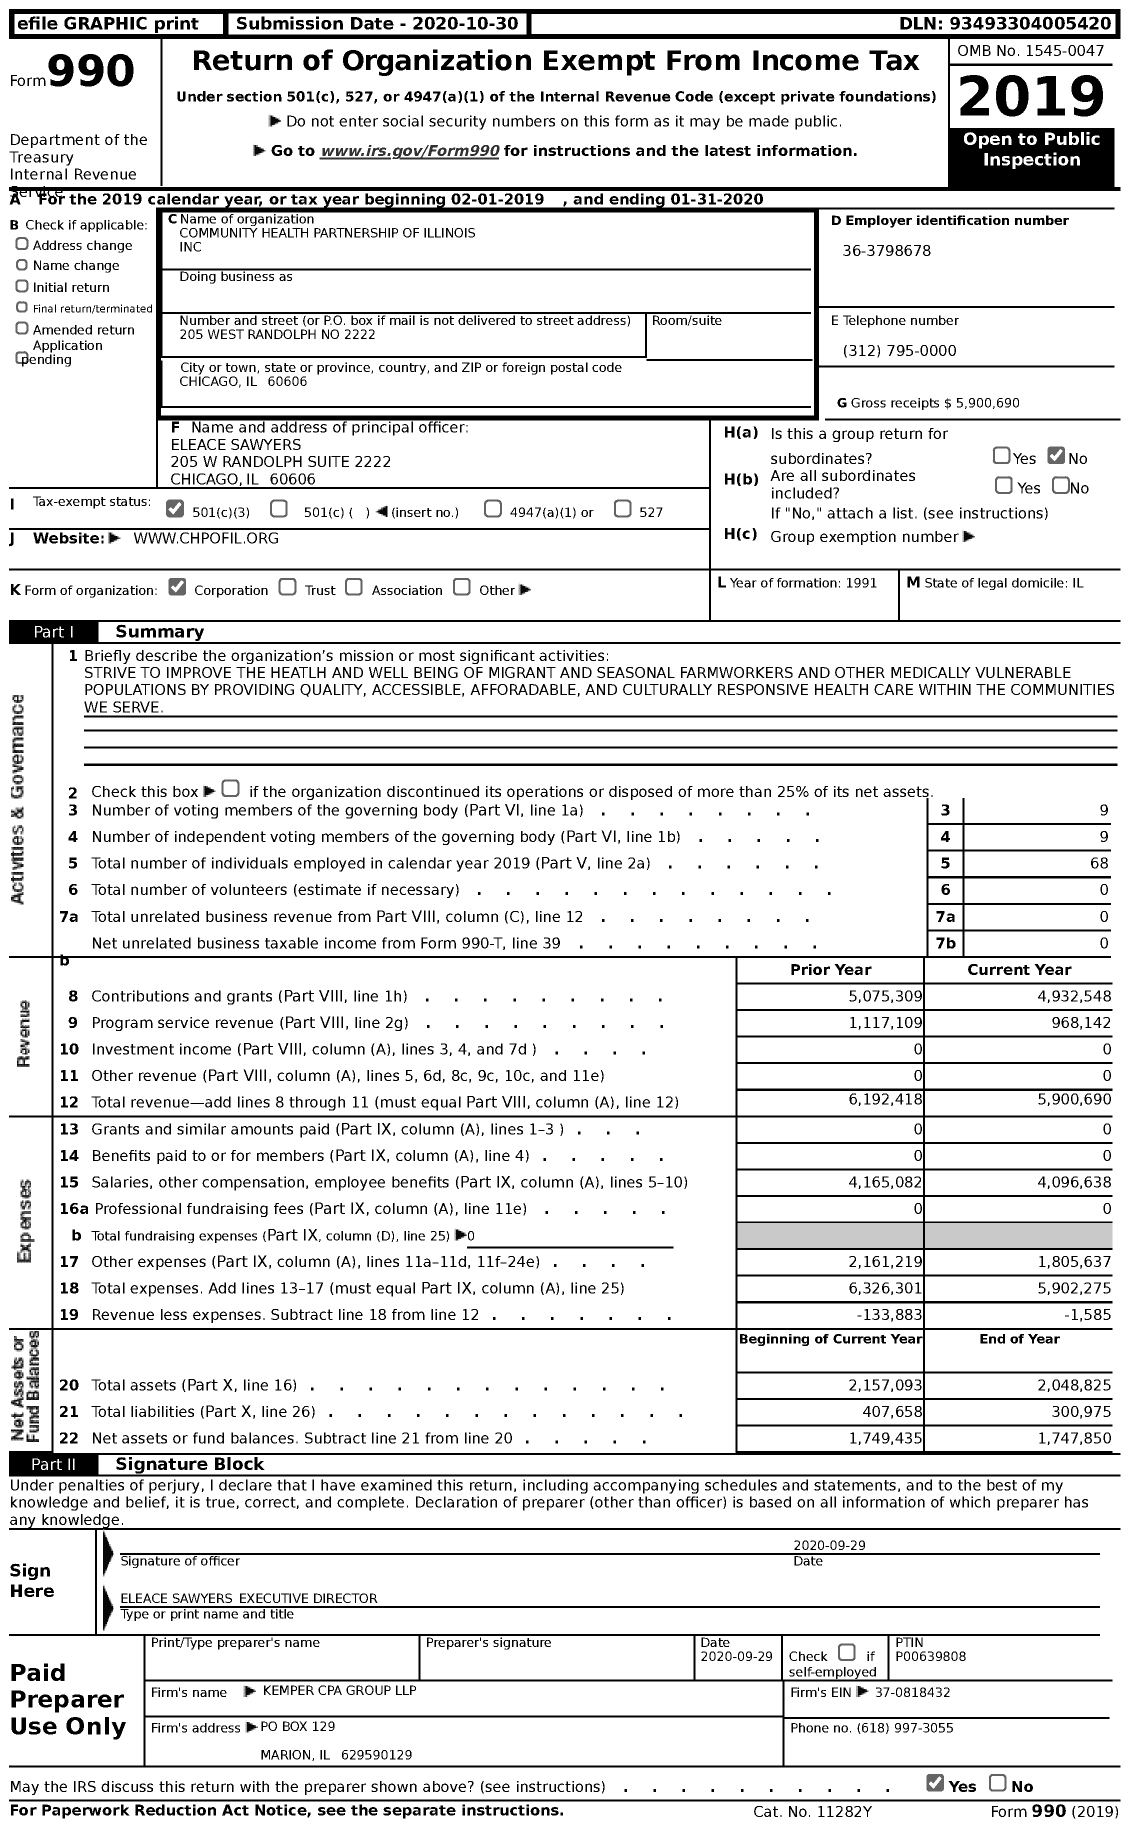 Image of first page of 2019 Form 990 for Community Health Partnership of Illinois (CHP)